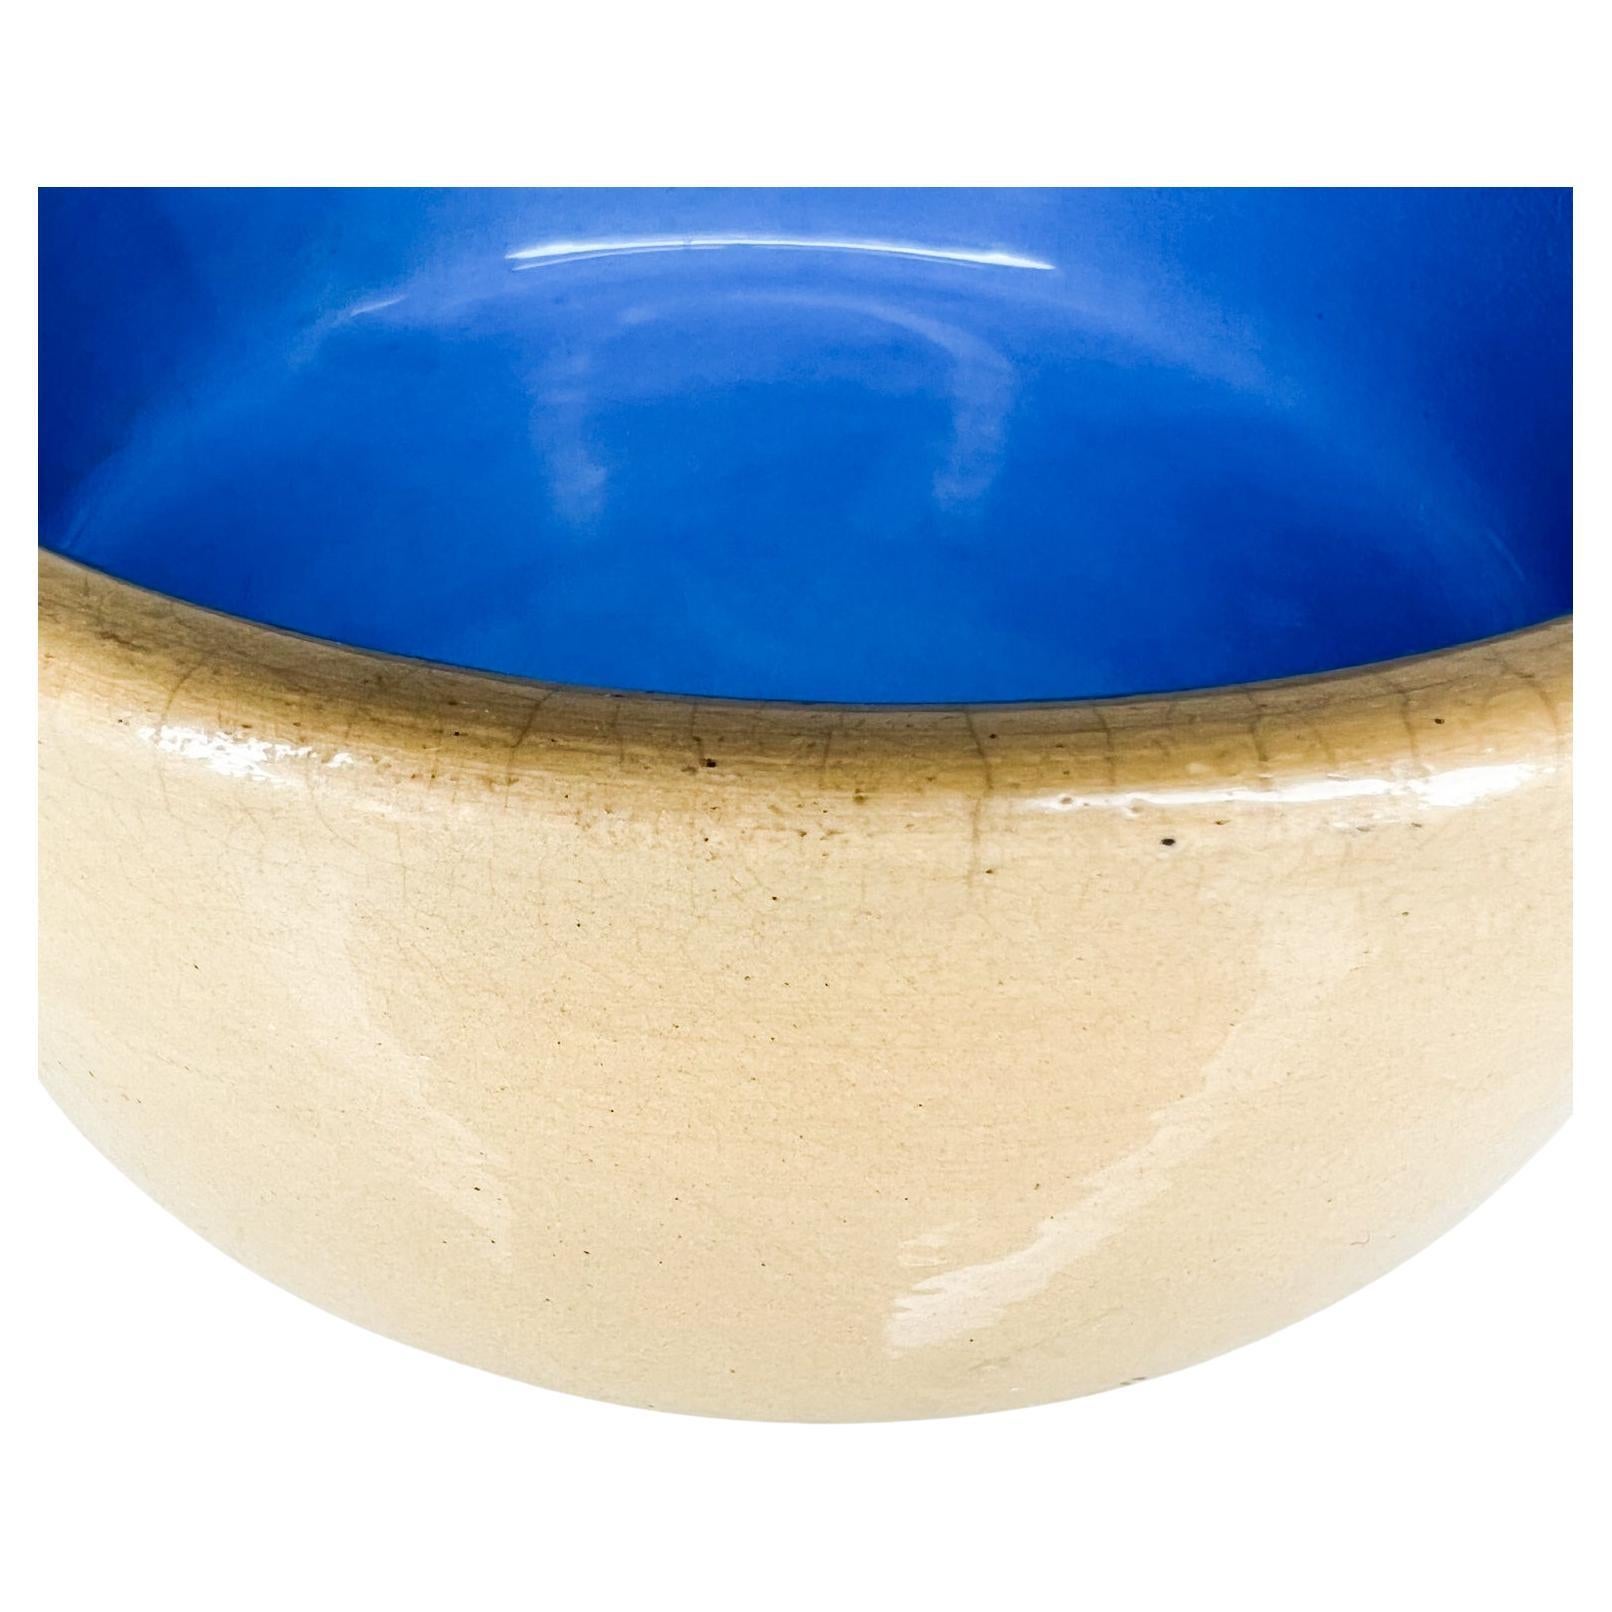 Mid-Century Modern 1960s Vintage Dreamy Blue Tan Ceramic Bowl made in England For Sale